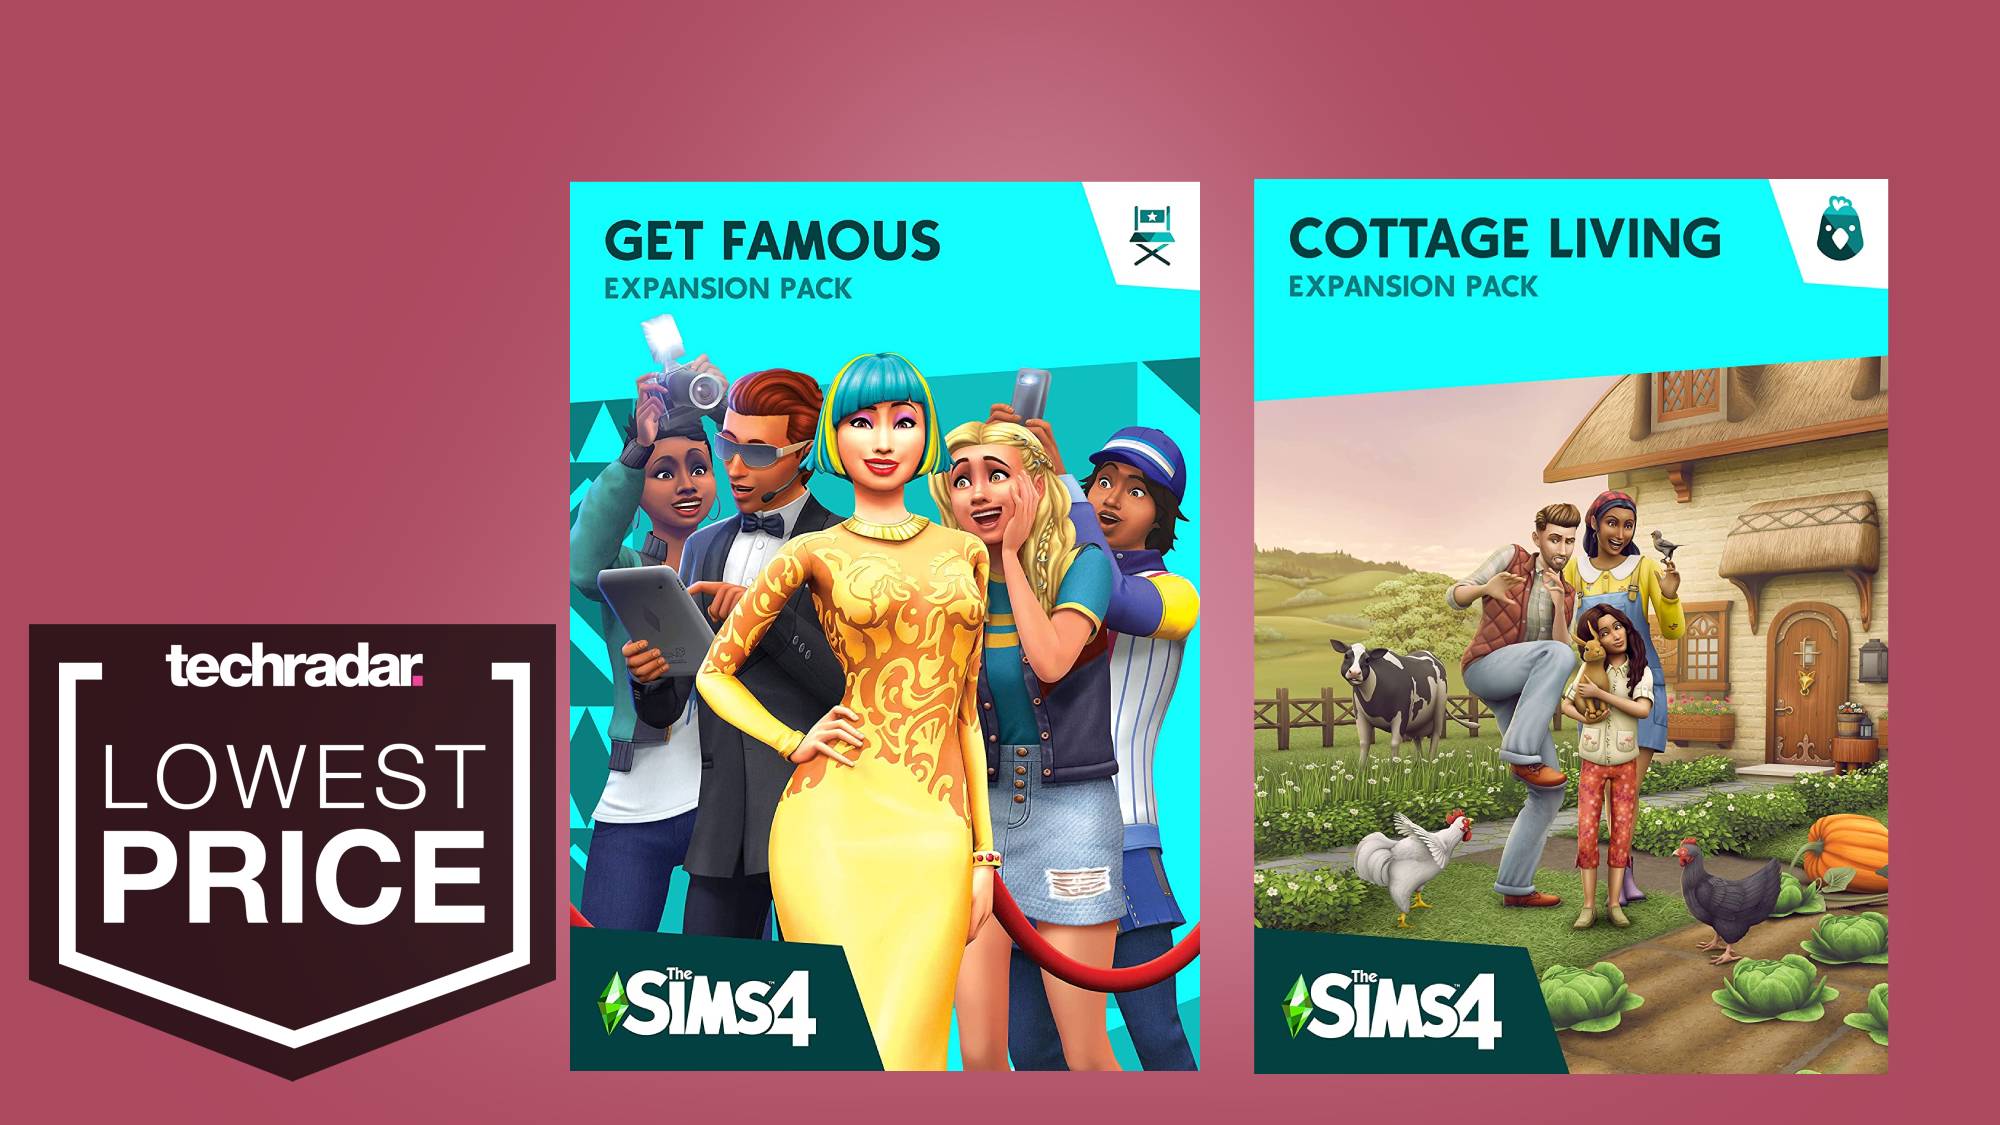 Now Available: The Sims 4 + Seasons Bundle at Origin